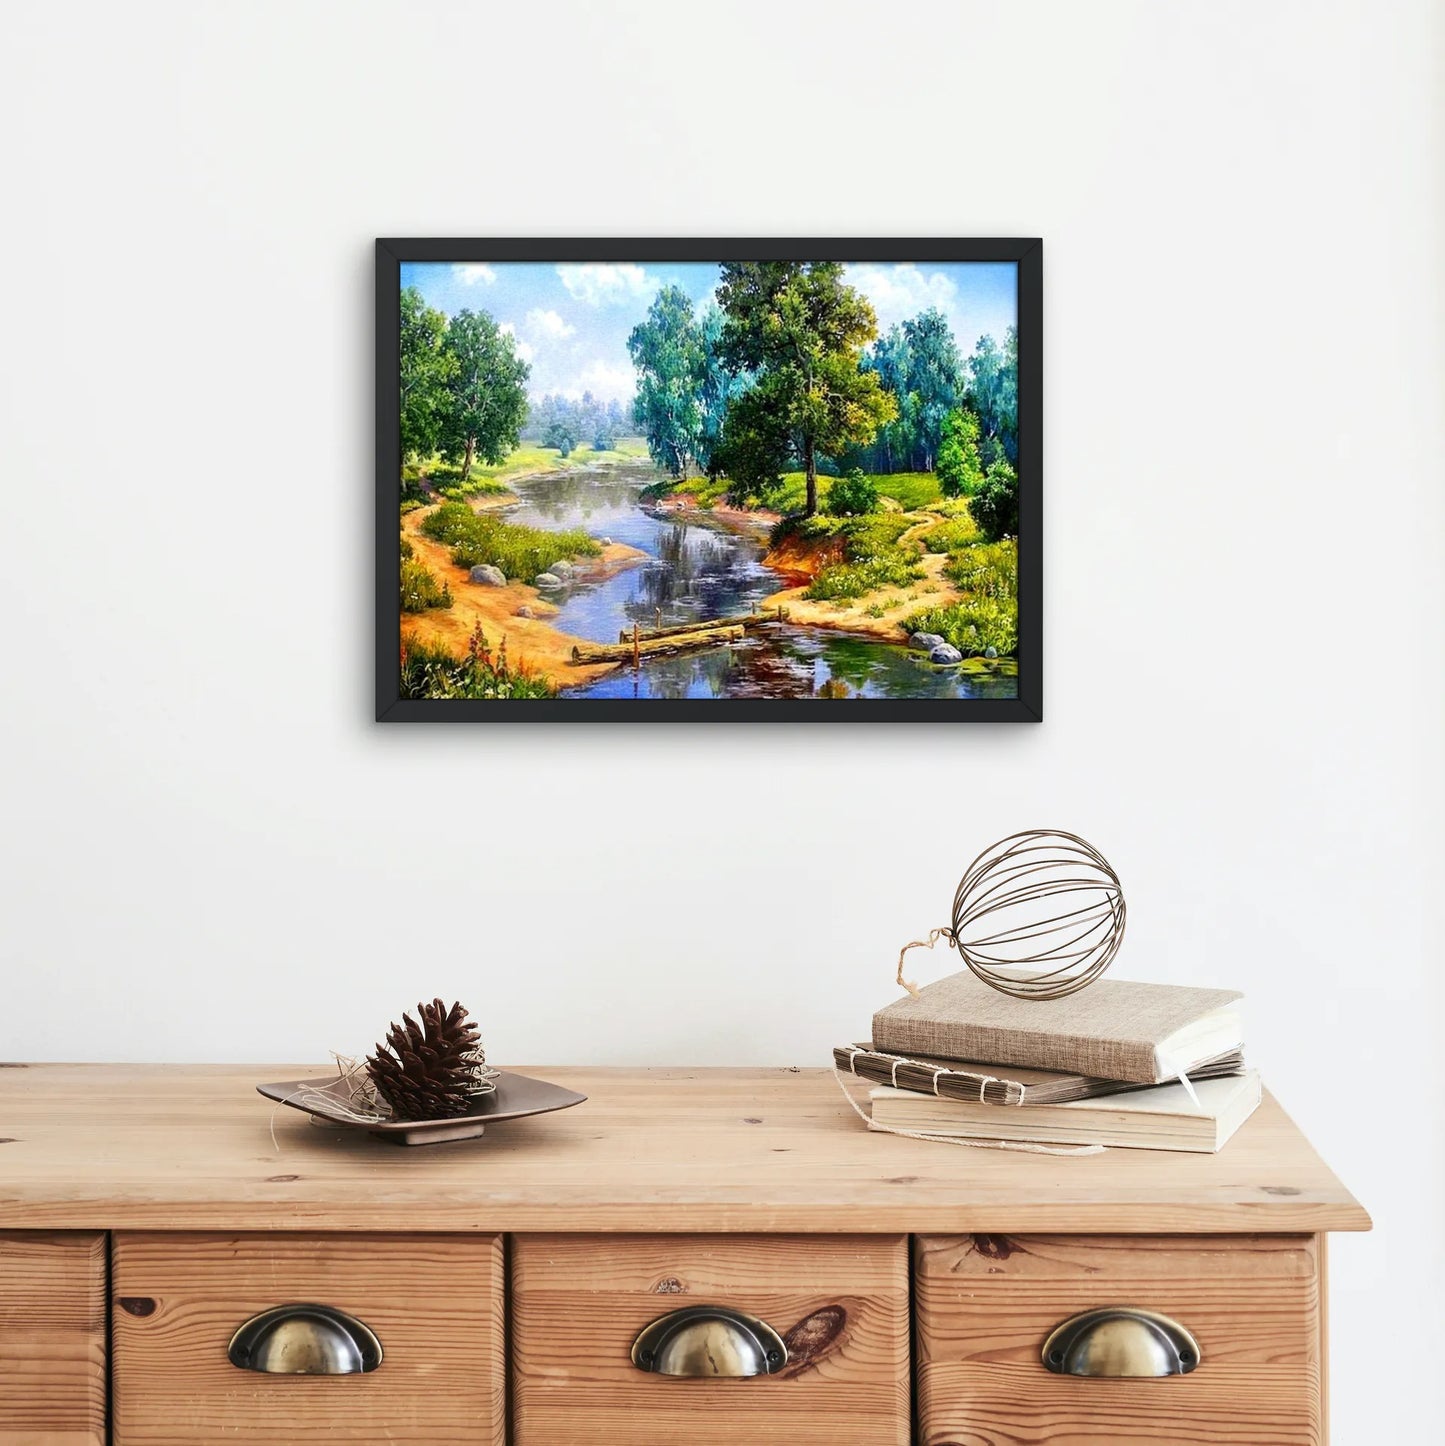 Trees and River - Diamond Painting Kit